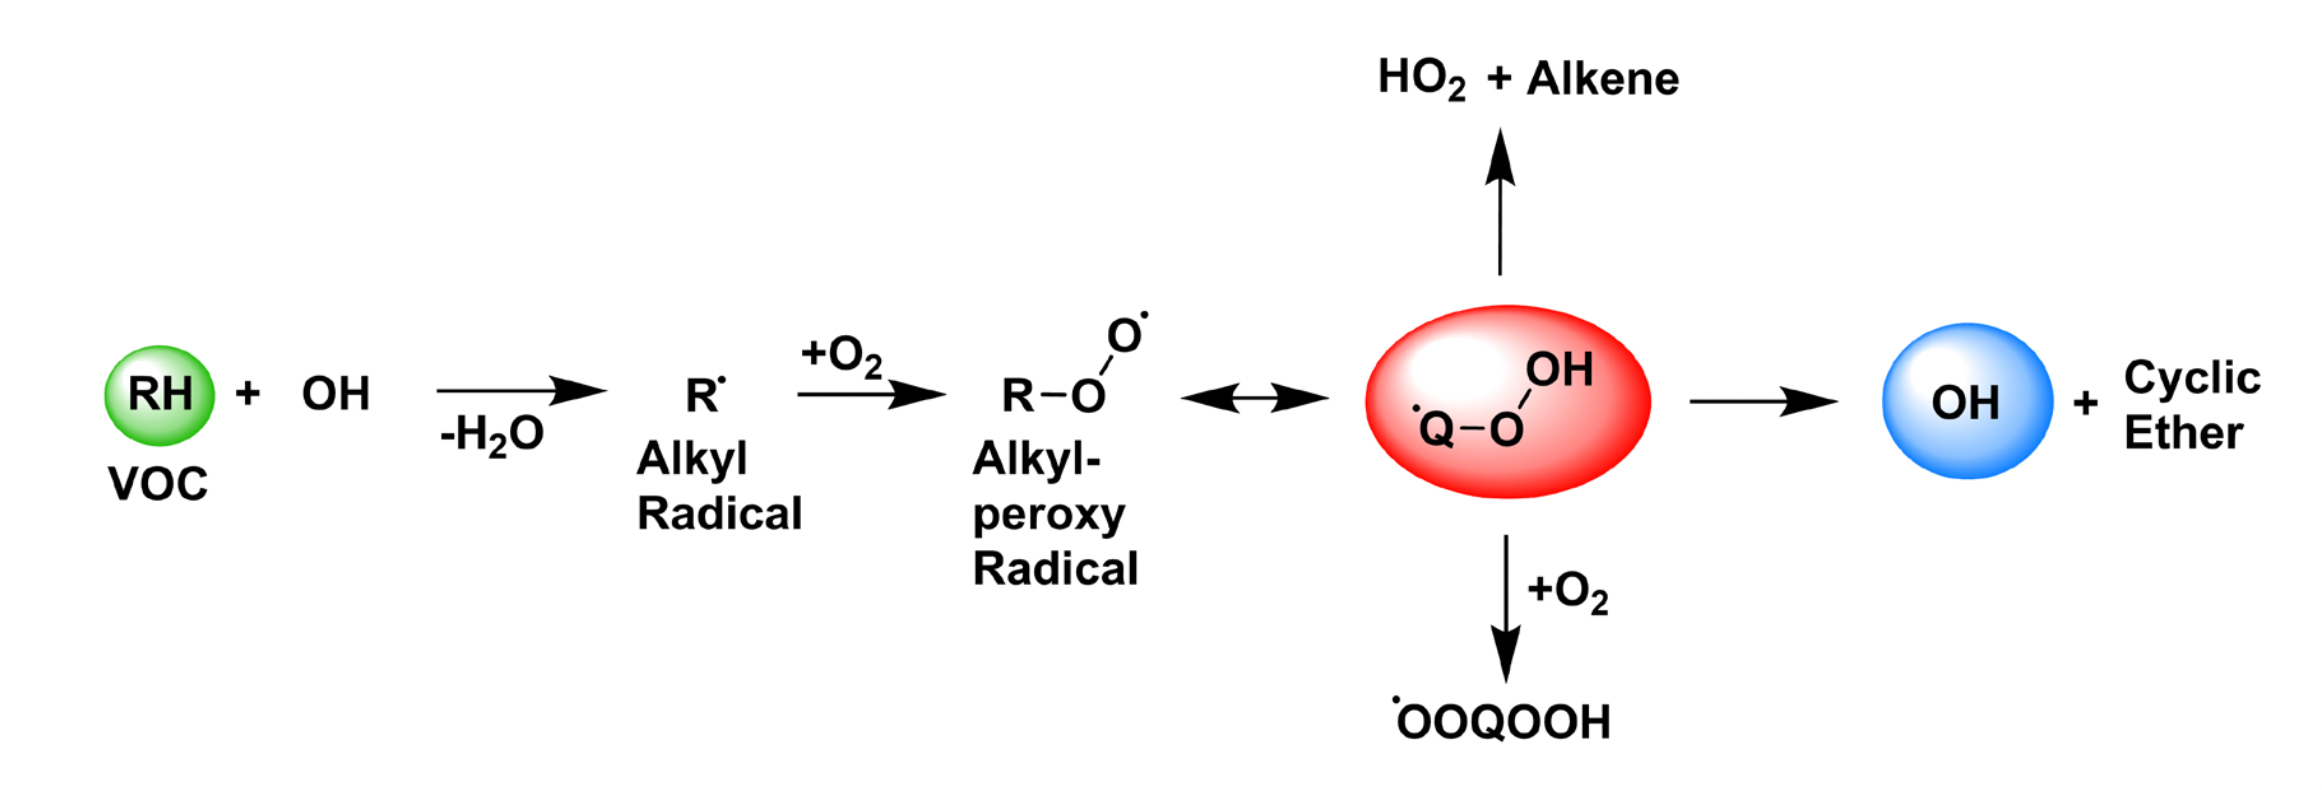 a diagram showing RH VOC on the far left, then + OH, minus H2O, then an alkyl radical, then plus O2 and a alkyk-peroxy radical, then a circle with QOOH that can go to either HO2 plus alkene or OOQOOH with oxygen, then the final product is OH plus cyclic ether